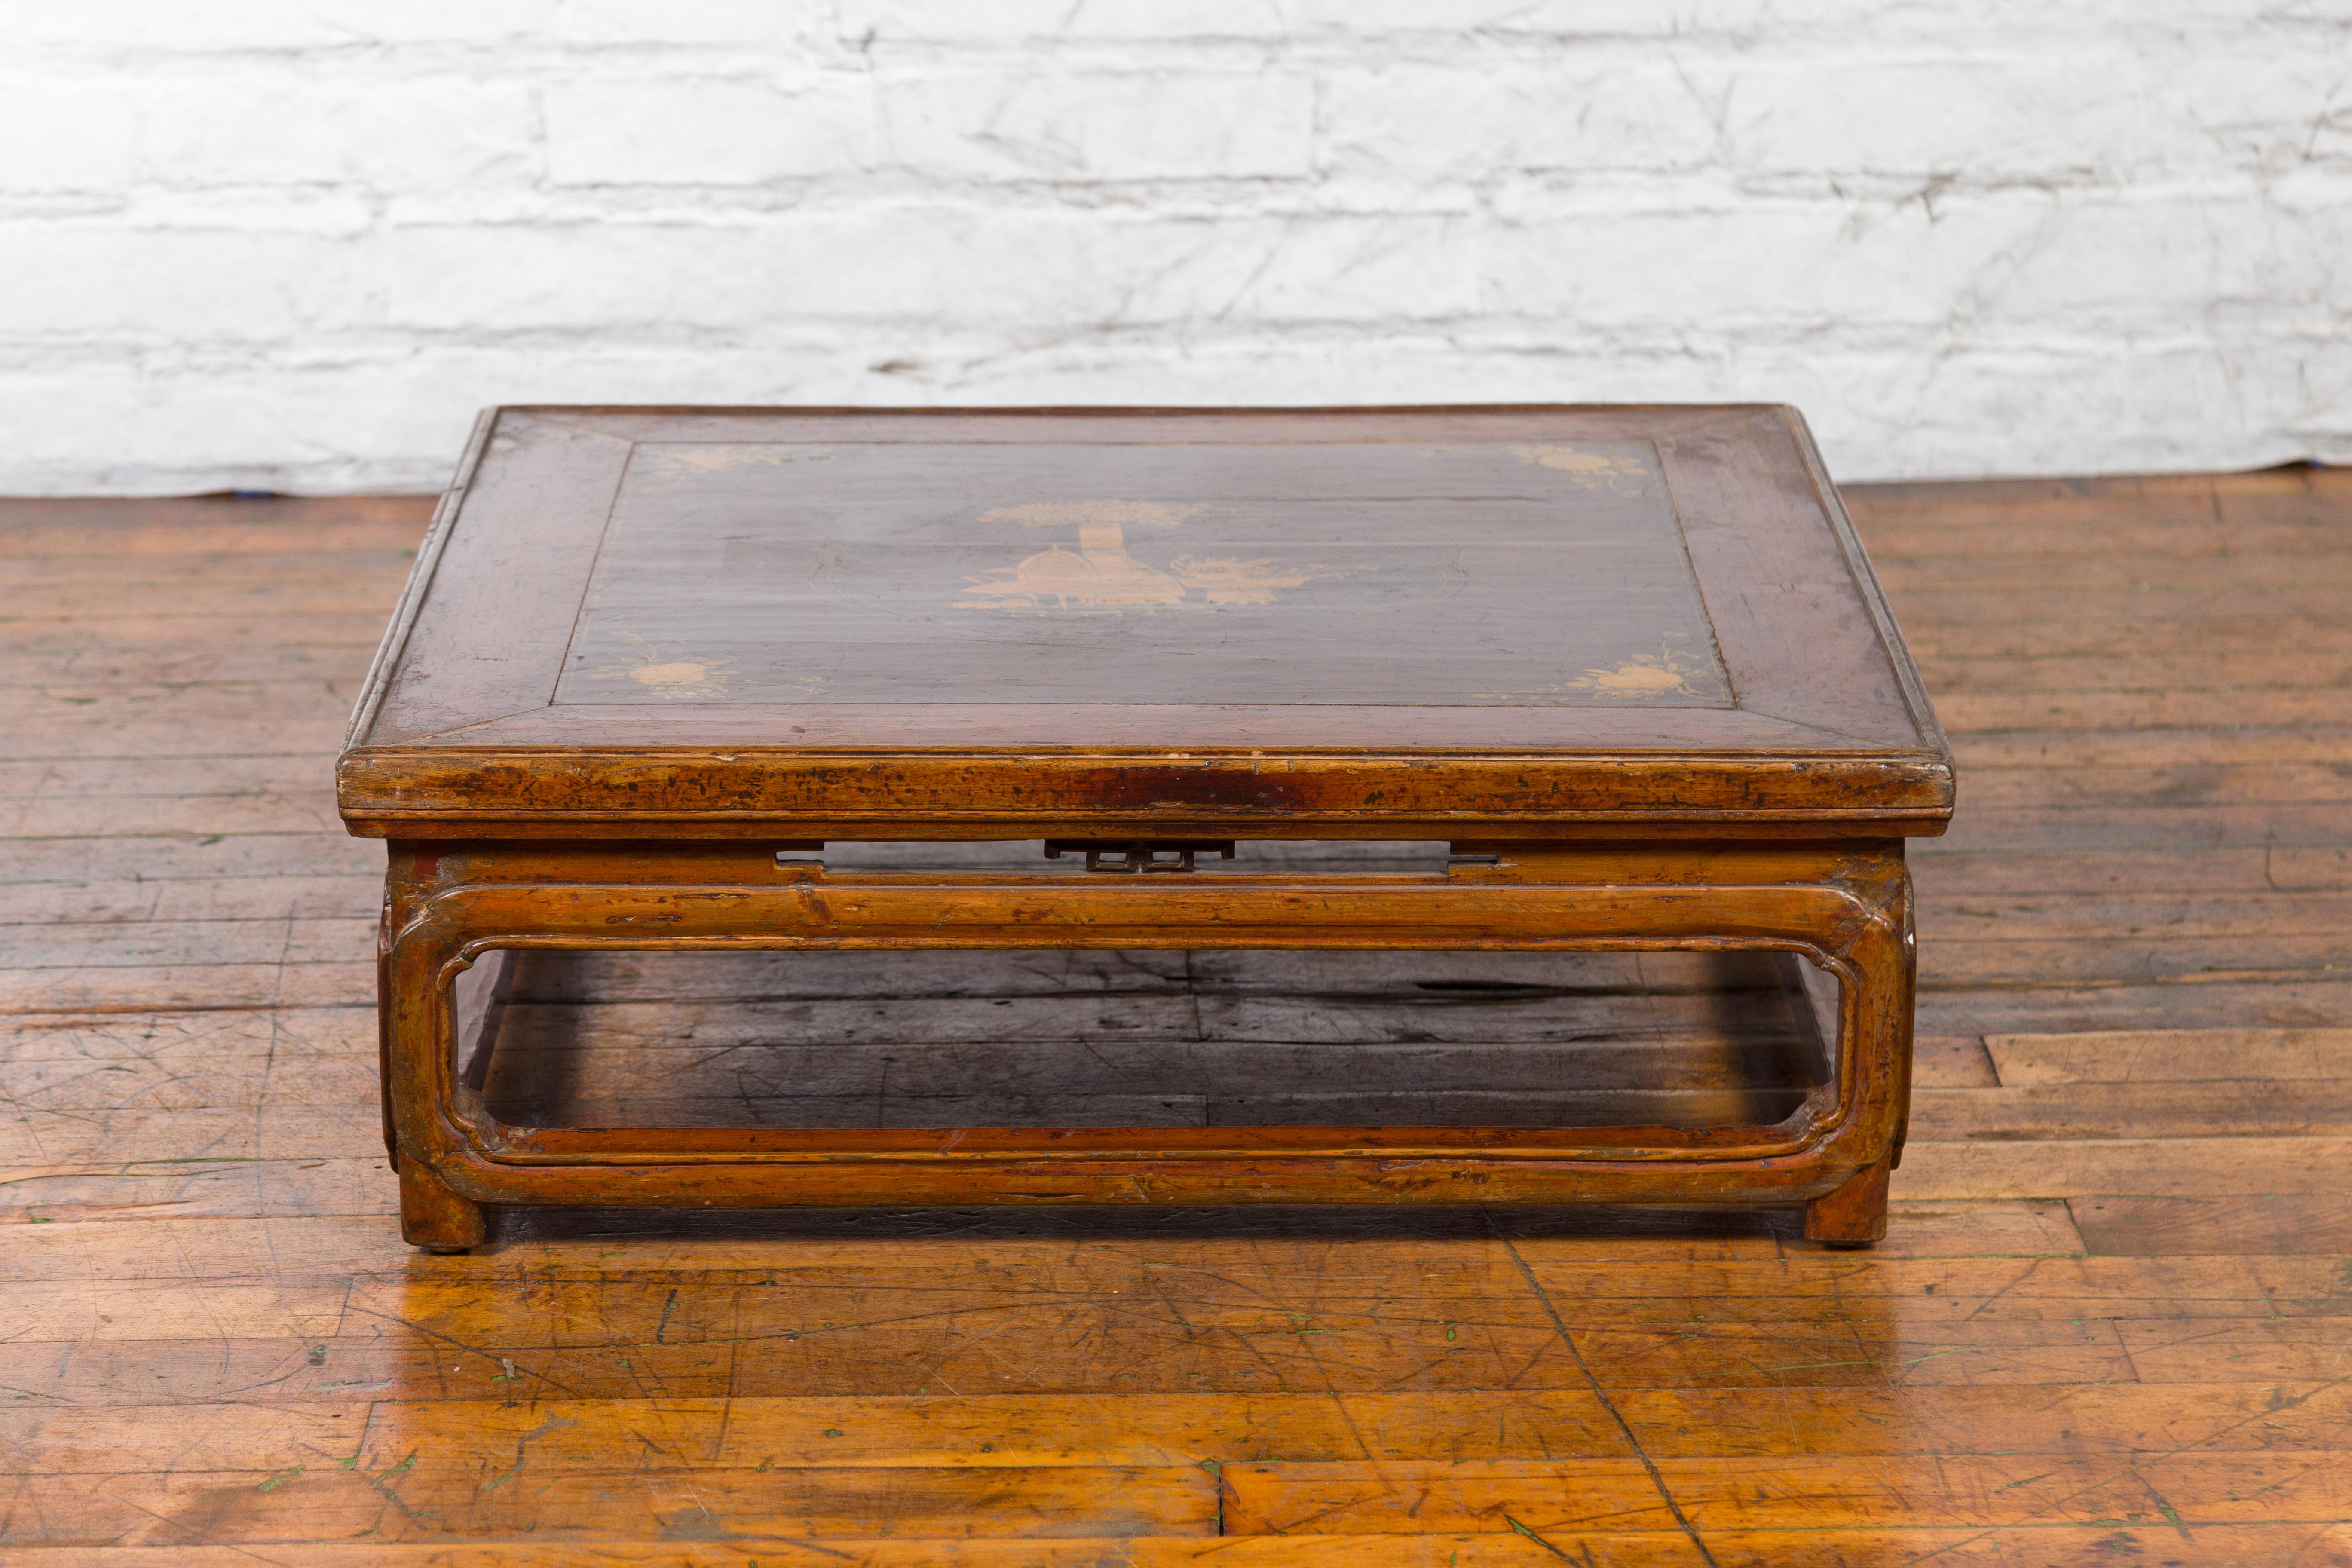 A Chinese Qing Dynasty period low kang coffee table from the 19th century, with painted décor and pierced apron. Created in China during the Qing Dynasty, this low kang coffee table features a square top adorned on its central board with a painted